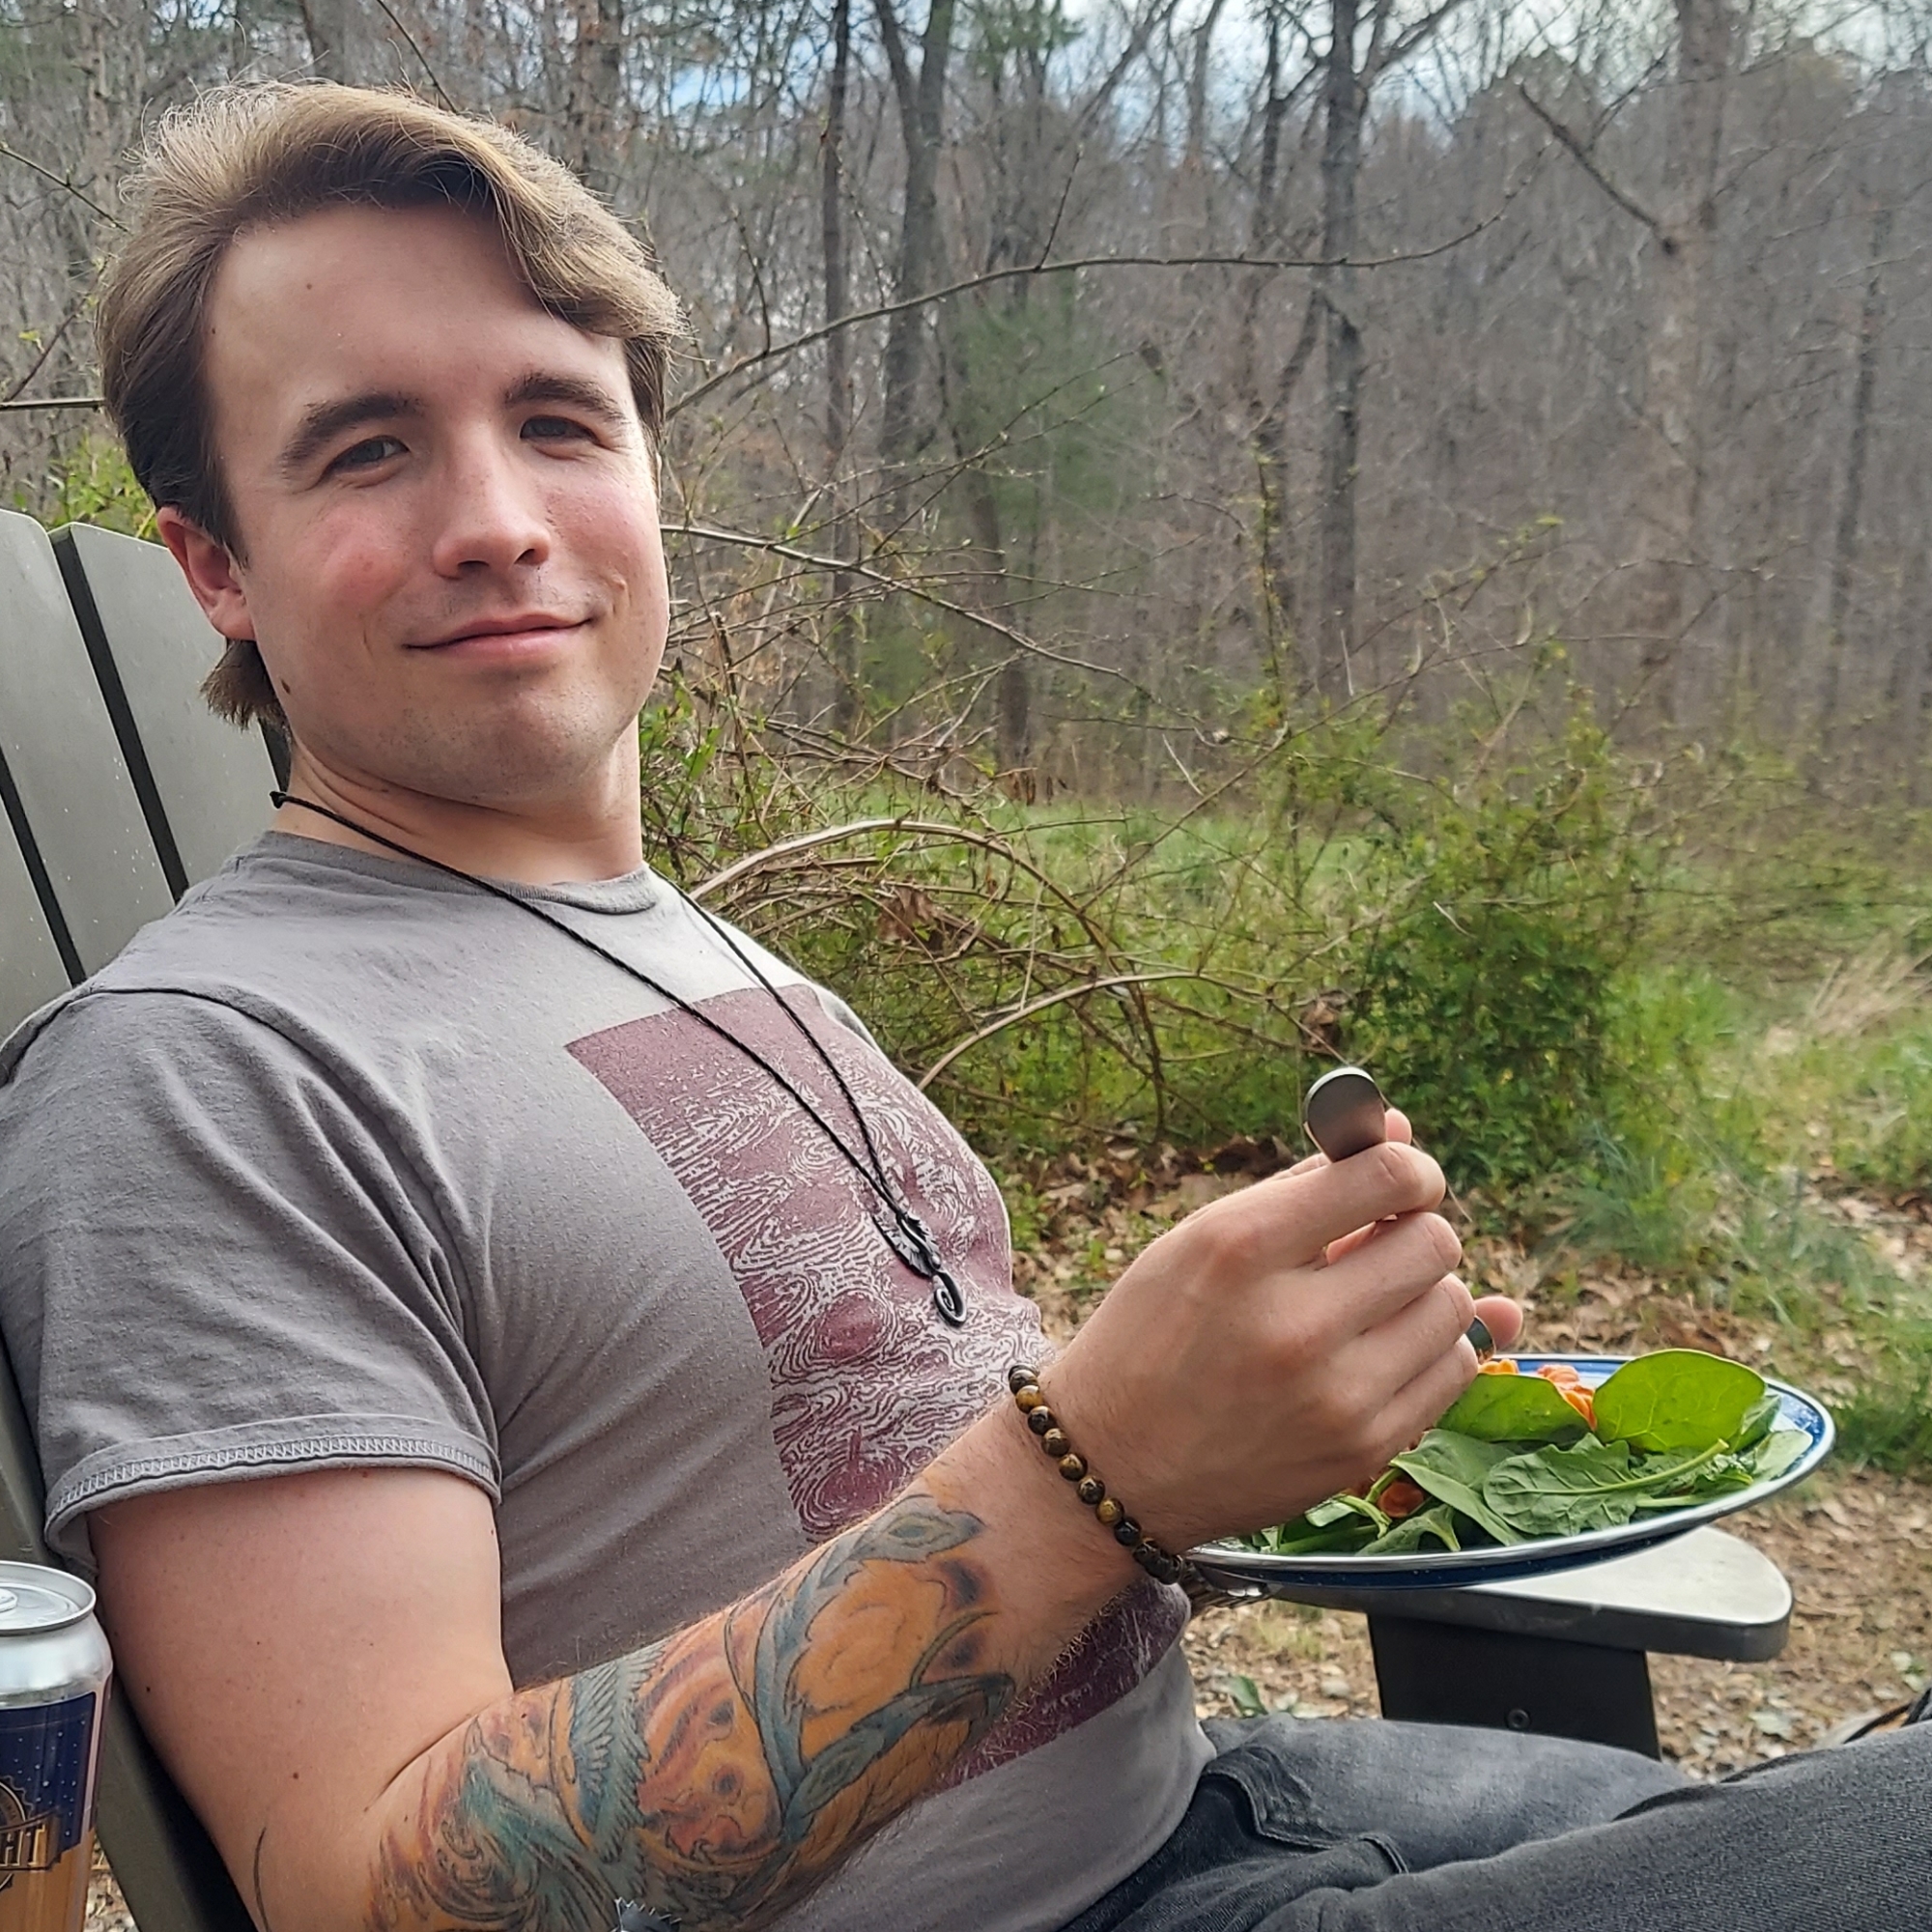 J's partner sitting outdoors, eating a plate of pasta and salad.